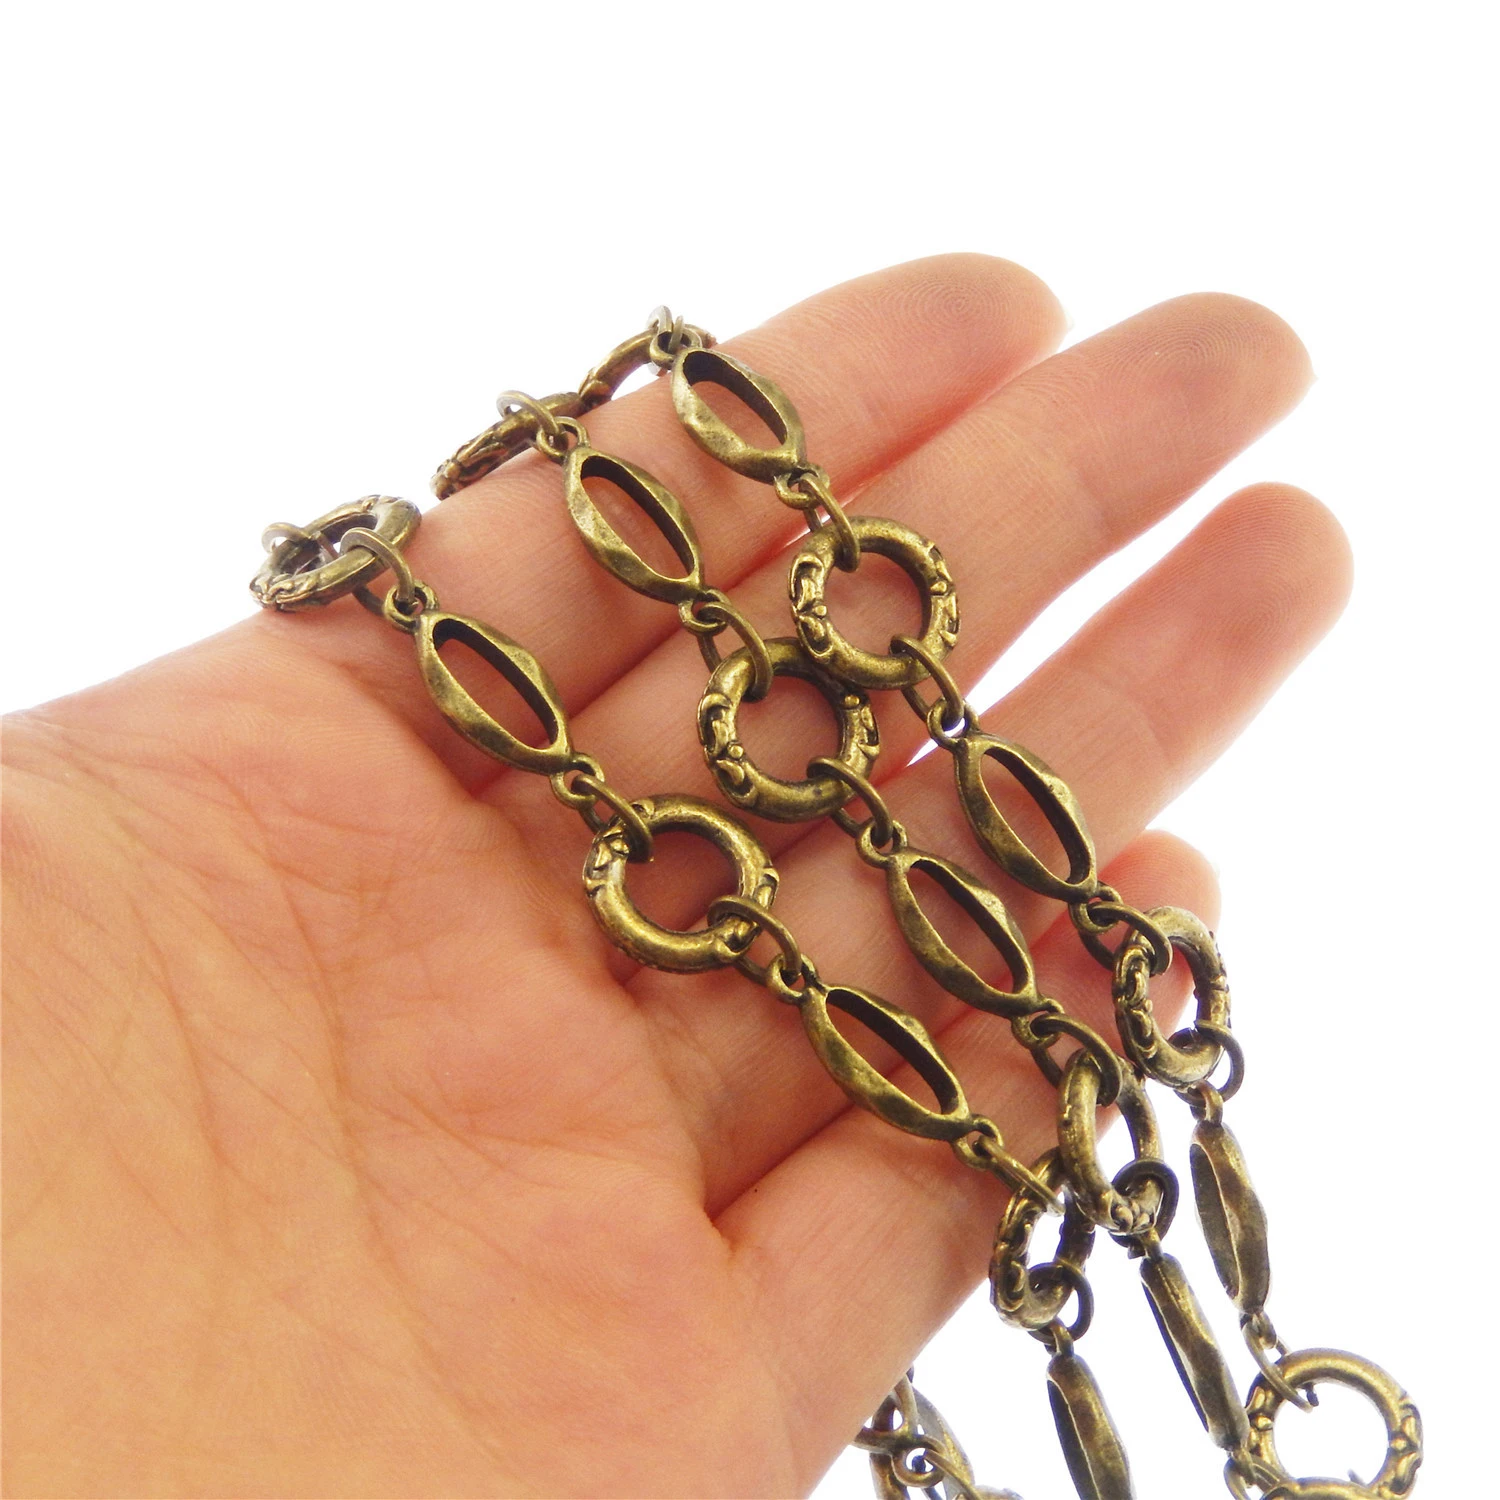 Antique Bronze Alloy Bead Chains For Jewelry Bracelet Making Accessories 